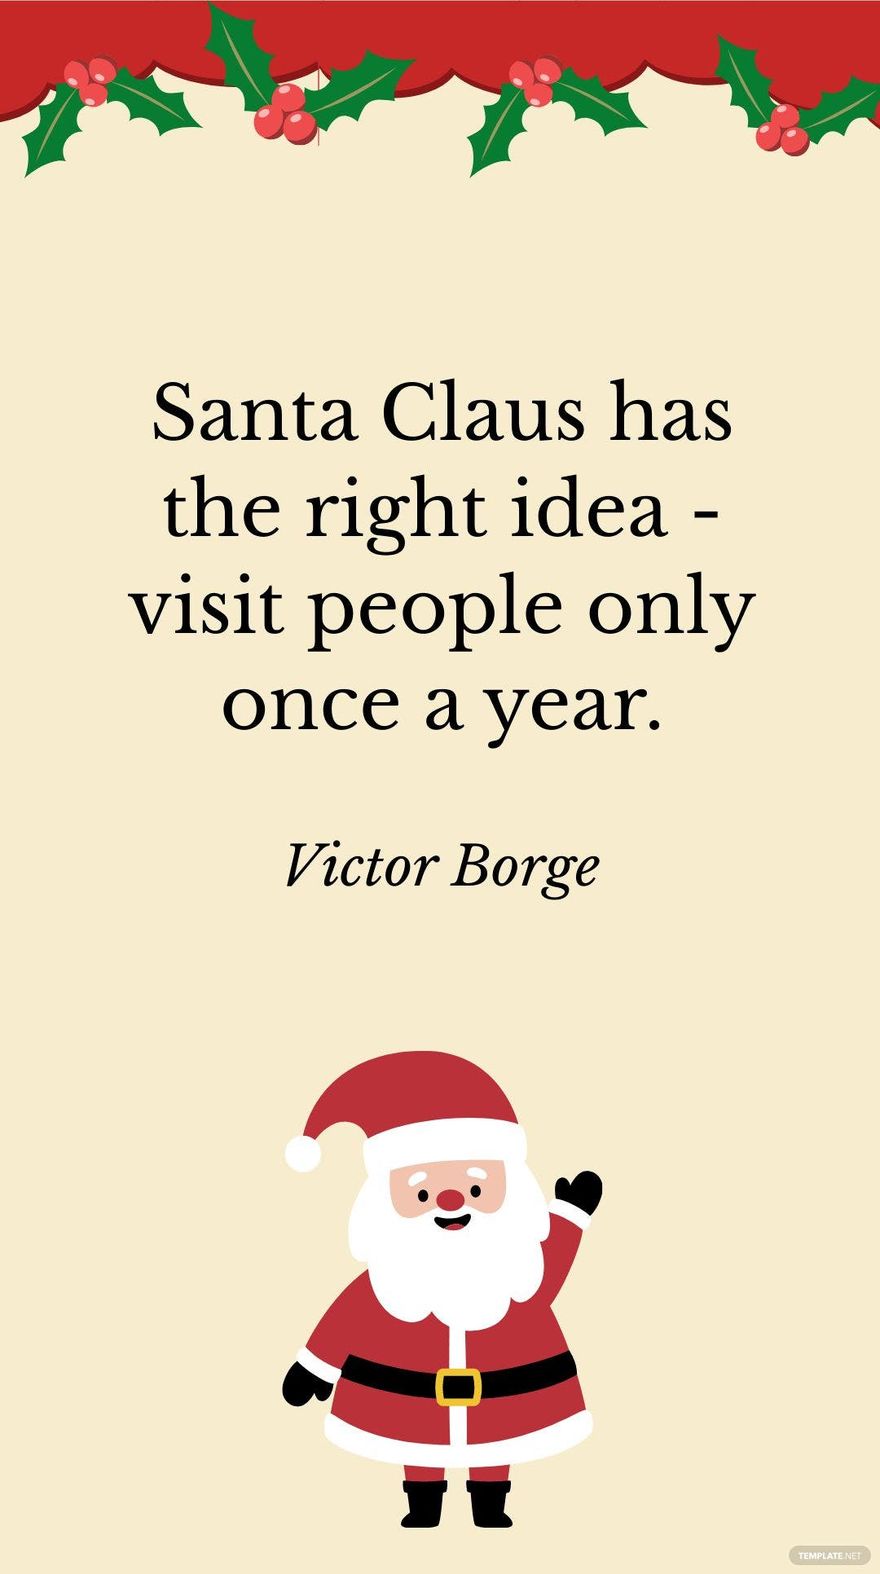 Victor Borge - Santa Claus has the right idea - visit people only once a year.